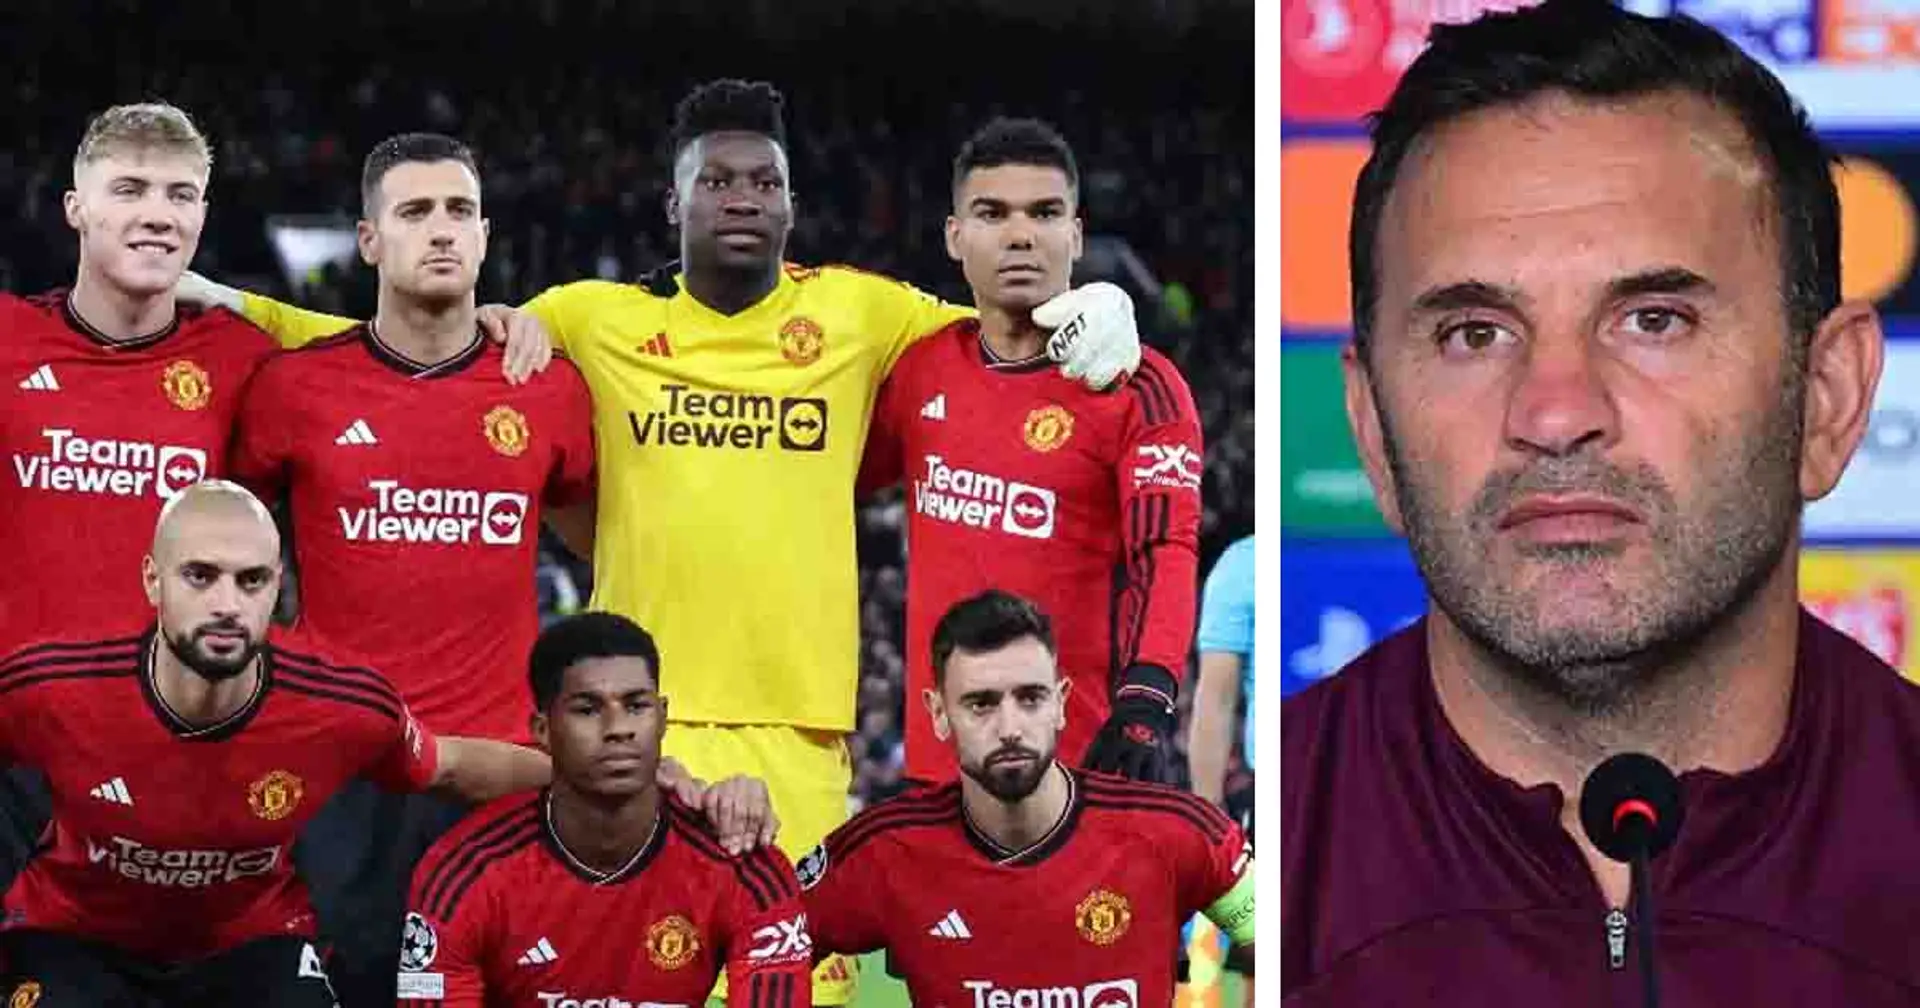 'We wanted to put pressure': Galatasaray manager names one Man United player he wanted his team to target